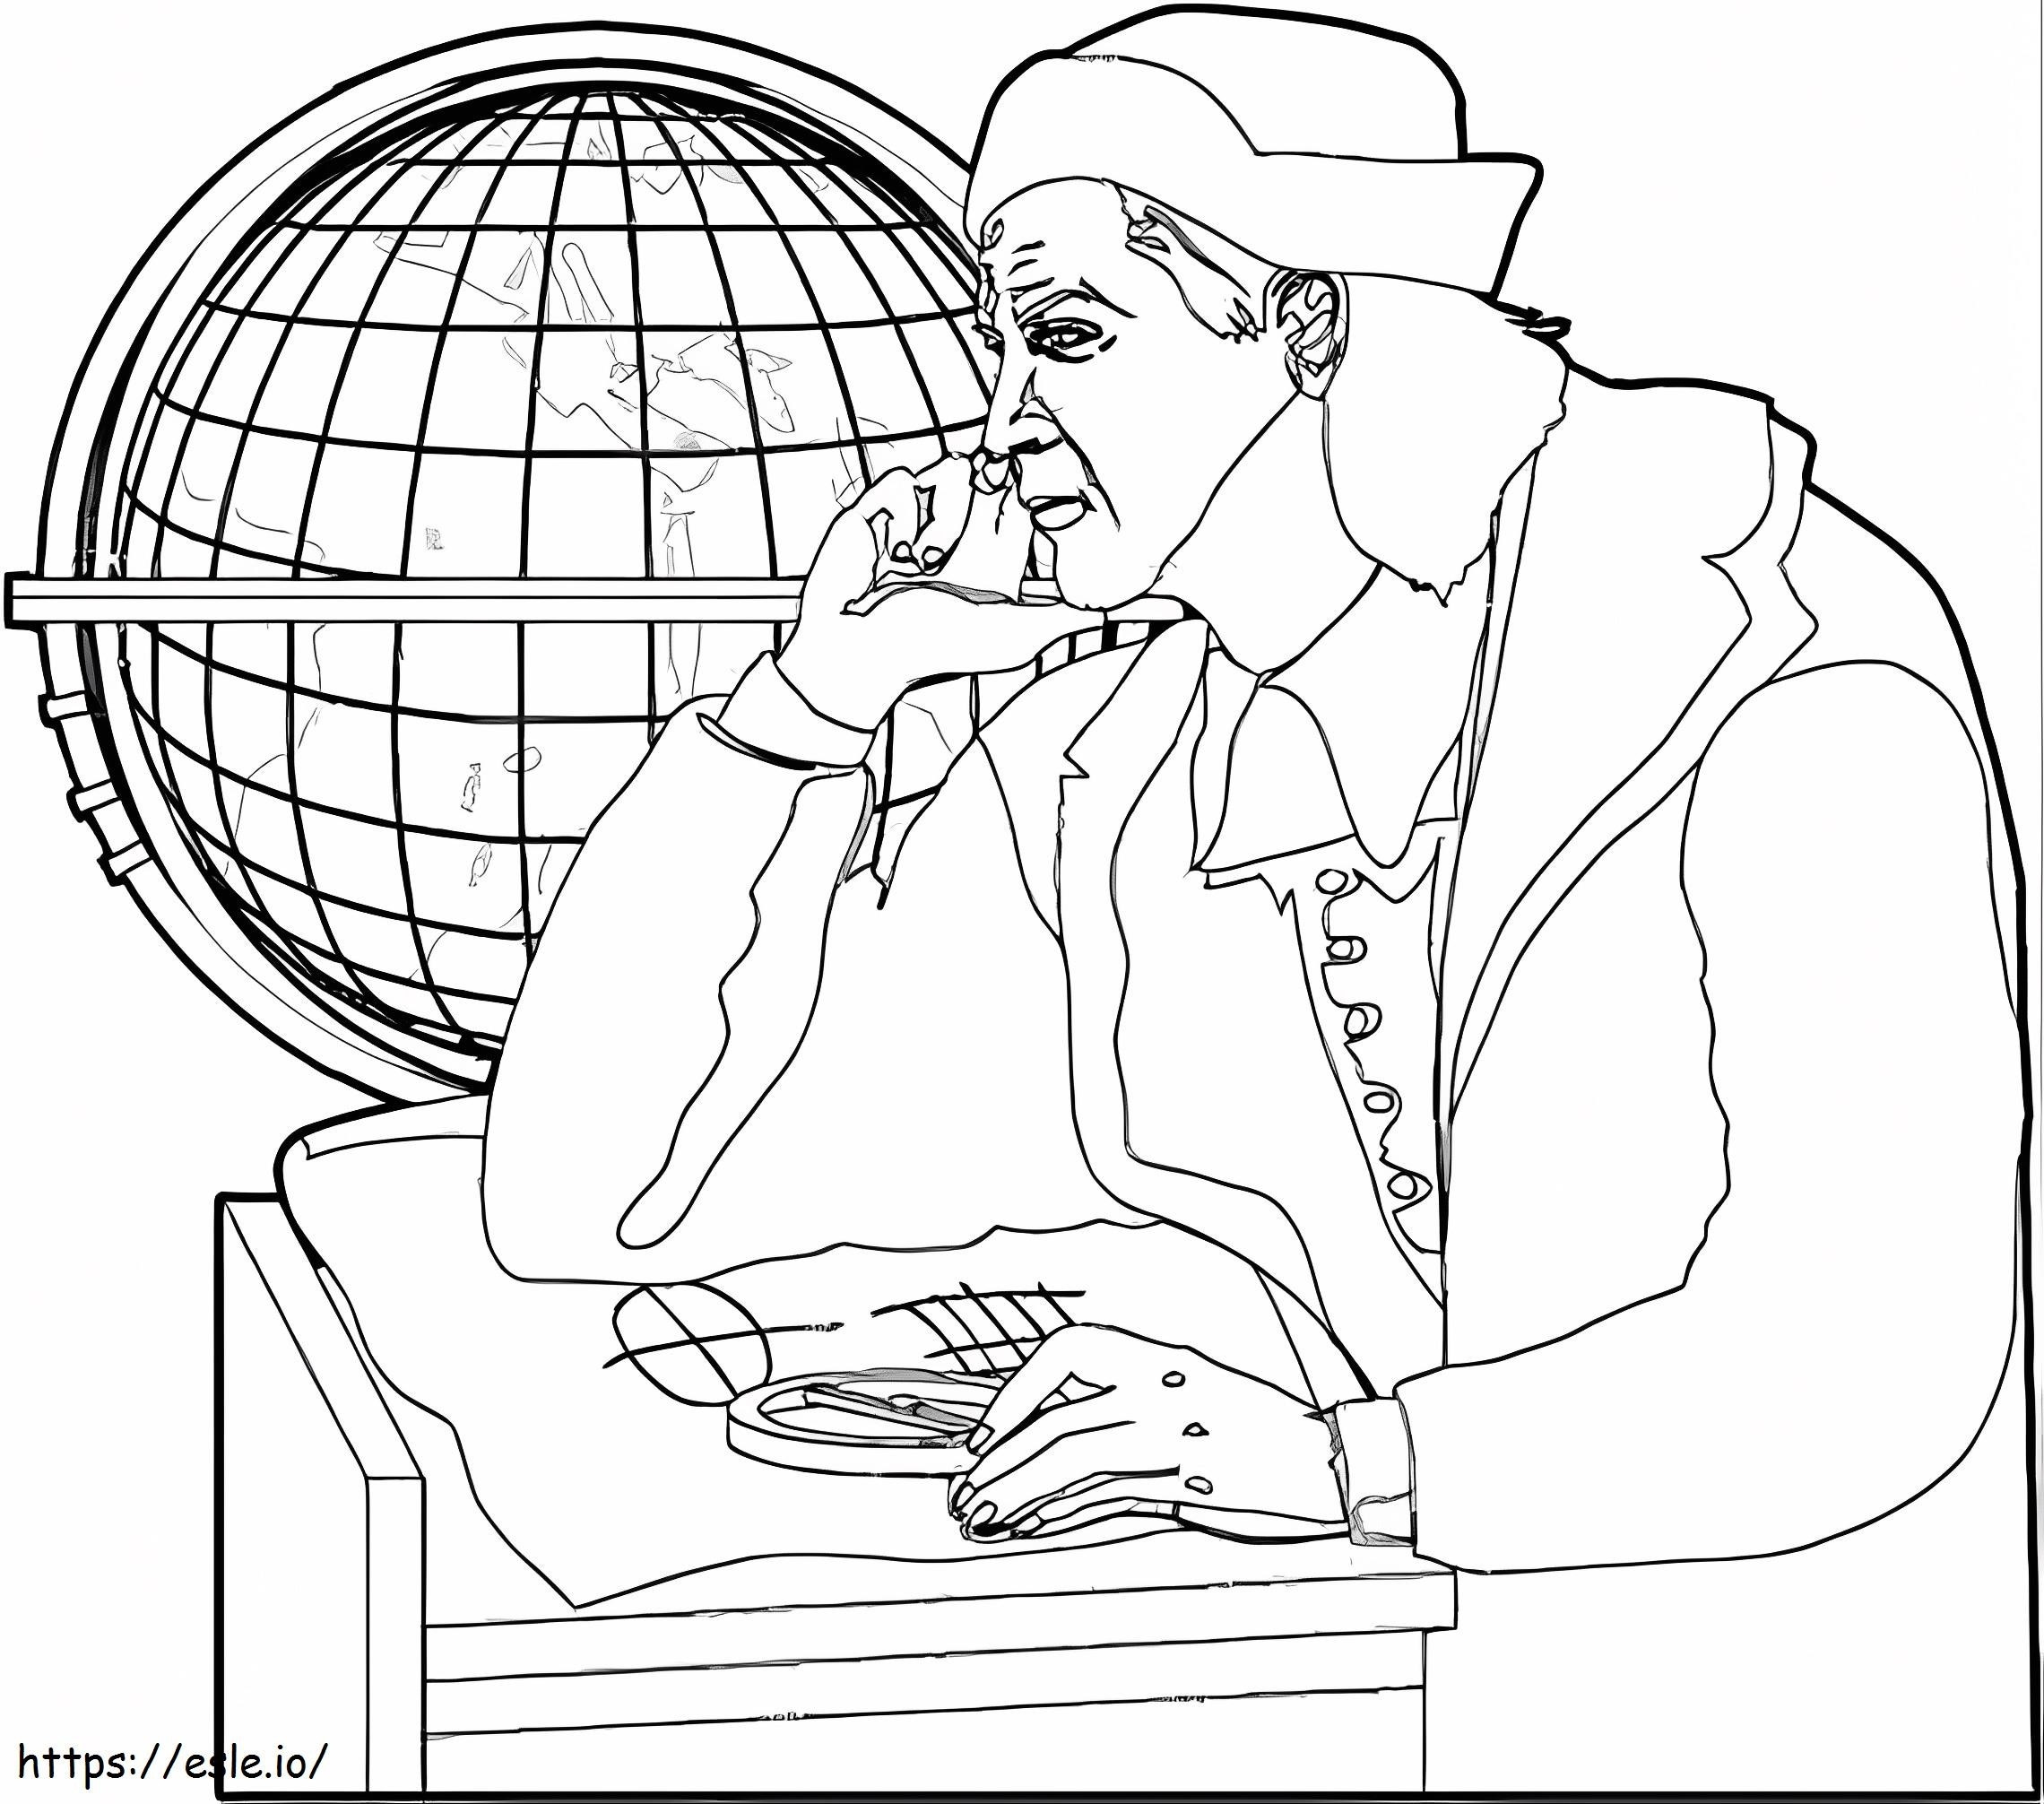 Christopher Columbus 5 coloring page